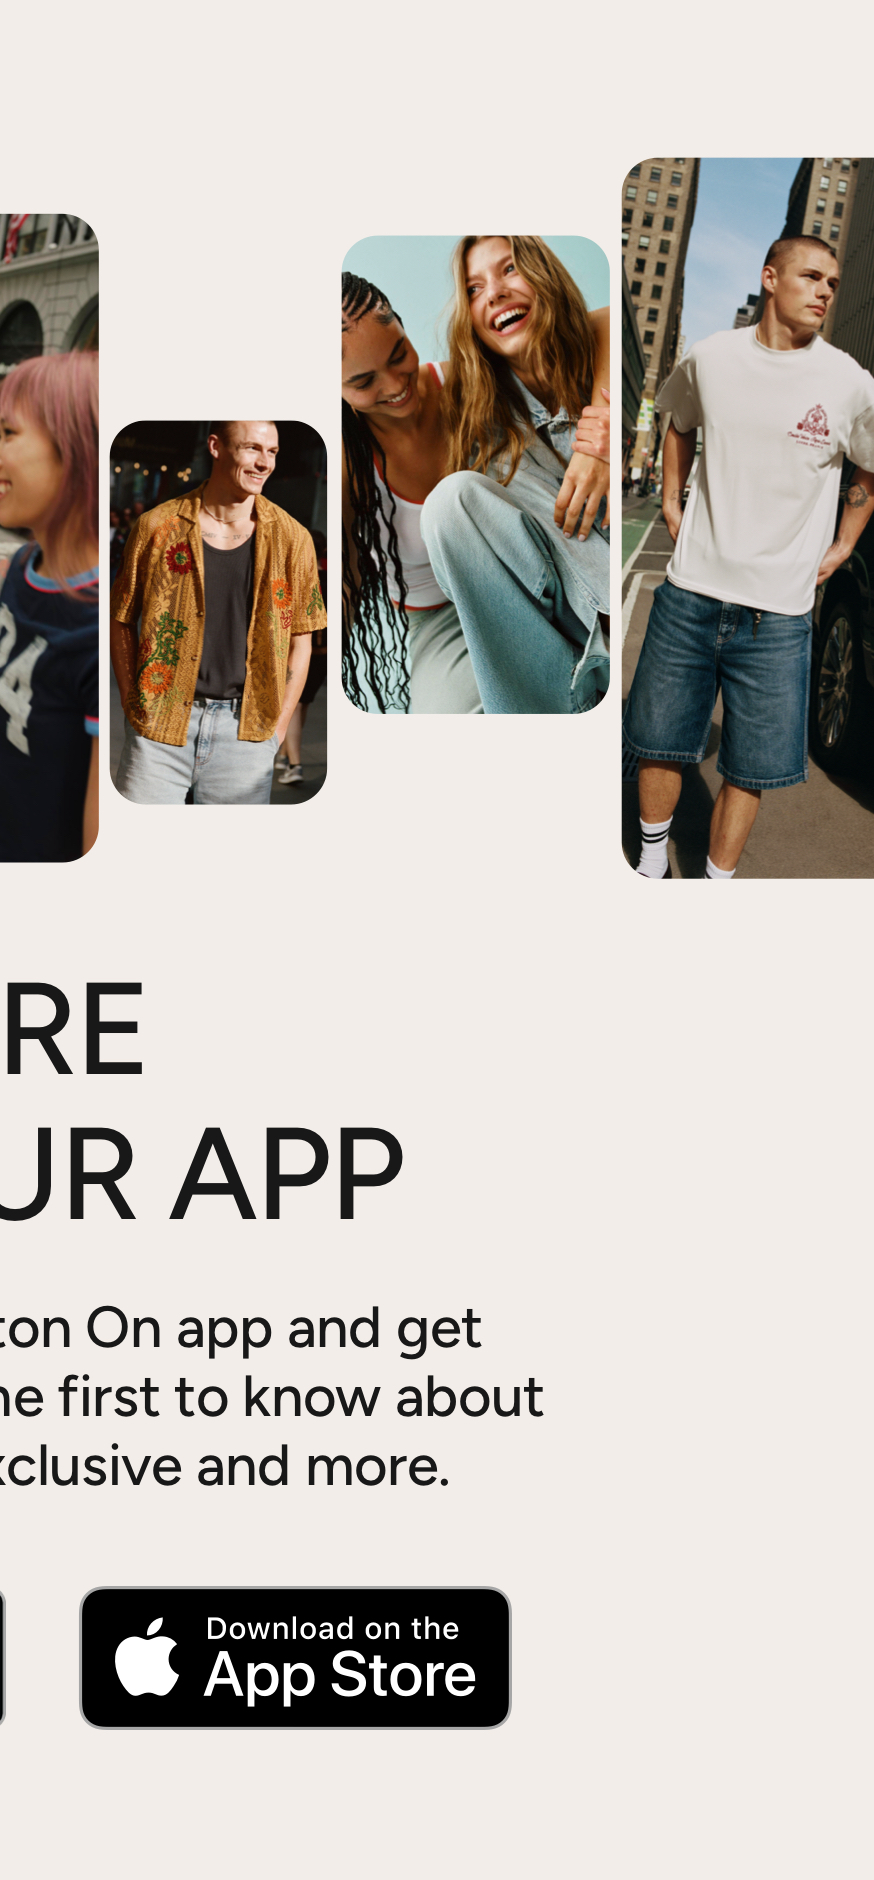 Download the Cotton On app on the App Store